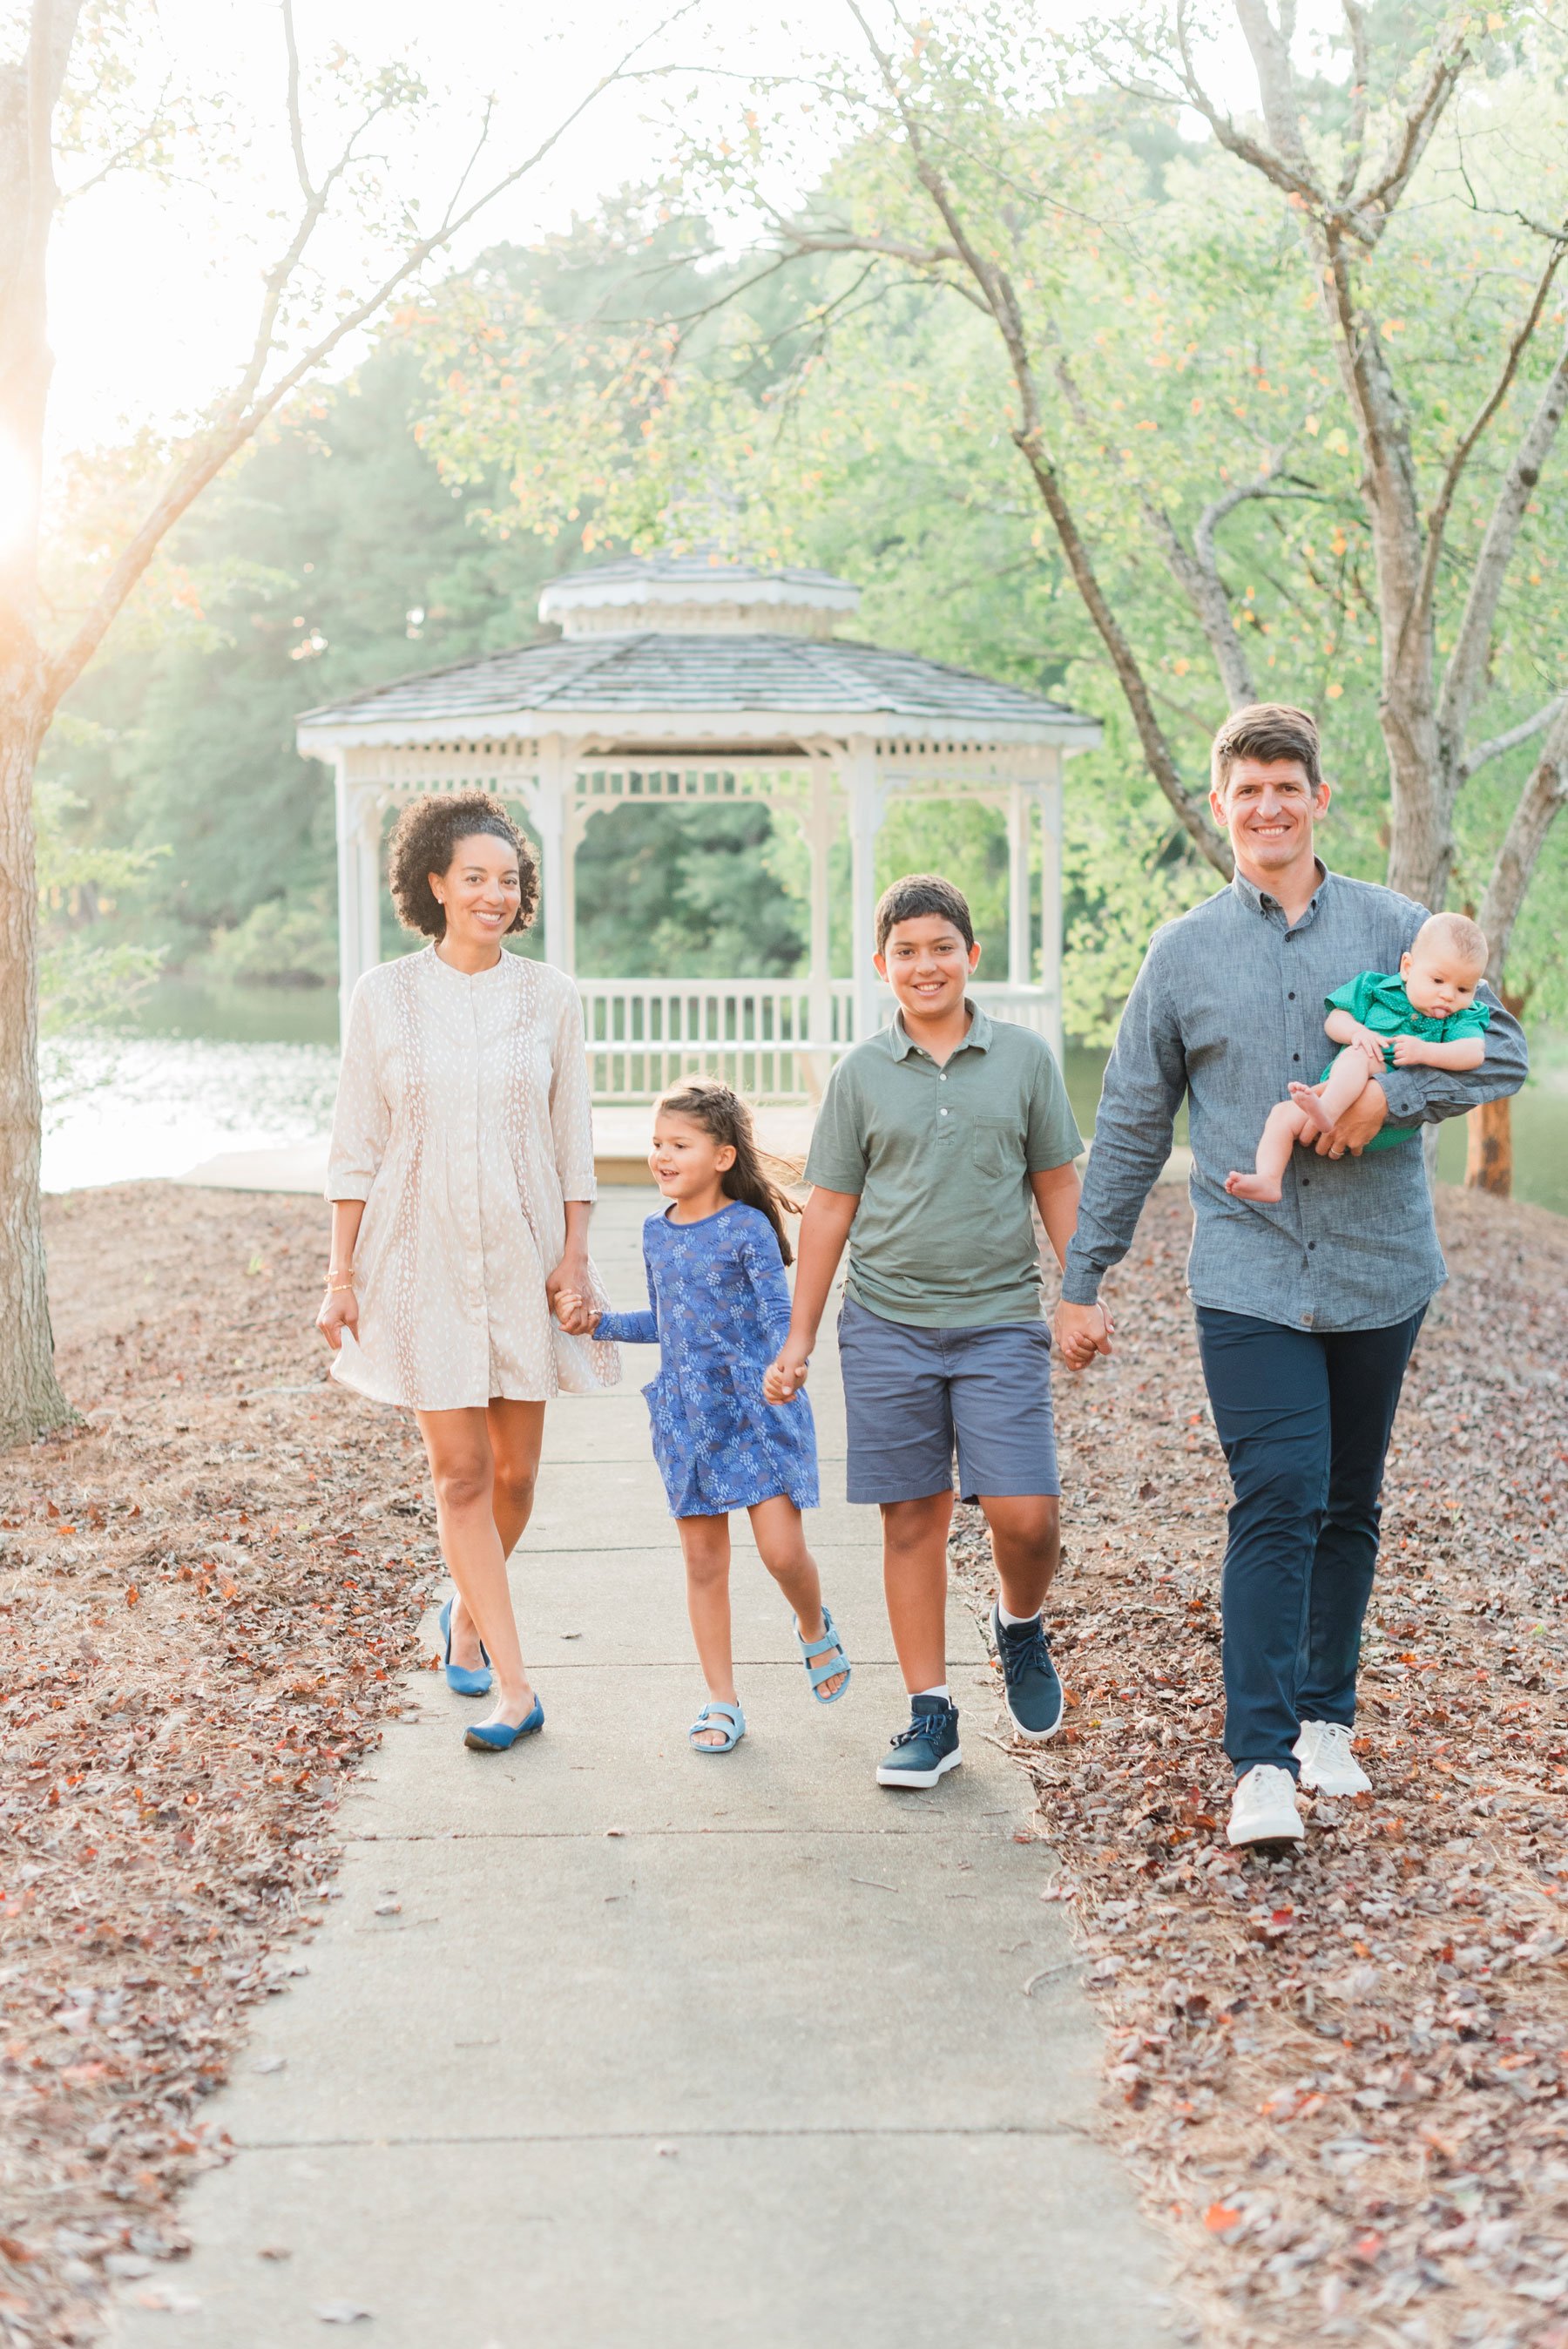    We met up at a local park for some gorgeous Georgia fall leaves and golden hour sun. #fallfamilyphotos #atlantafamilyphotographer #familyphotoswithkids #familyoutfitinspo #confidentkids #kidsselfesteem # confidencetips #georgiafamilyphotos #georgi